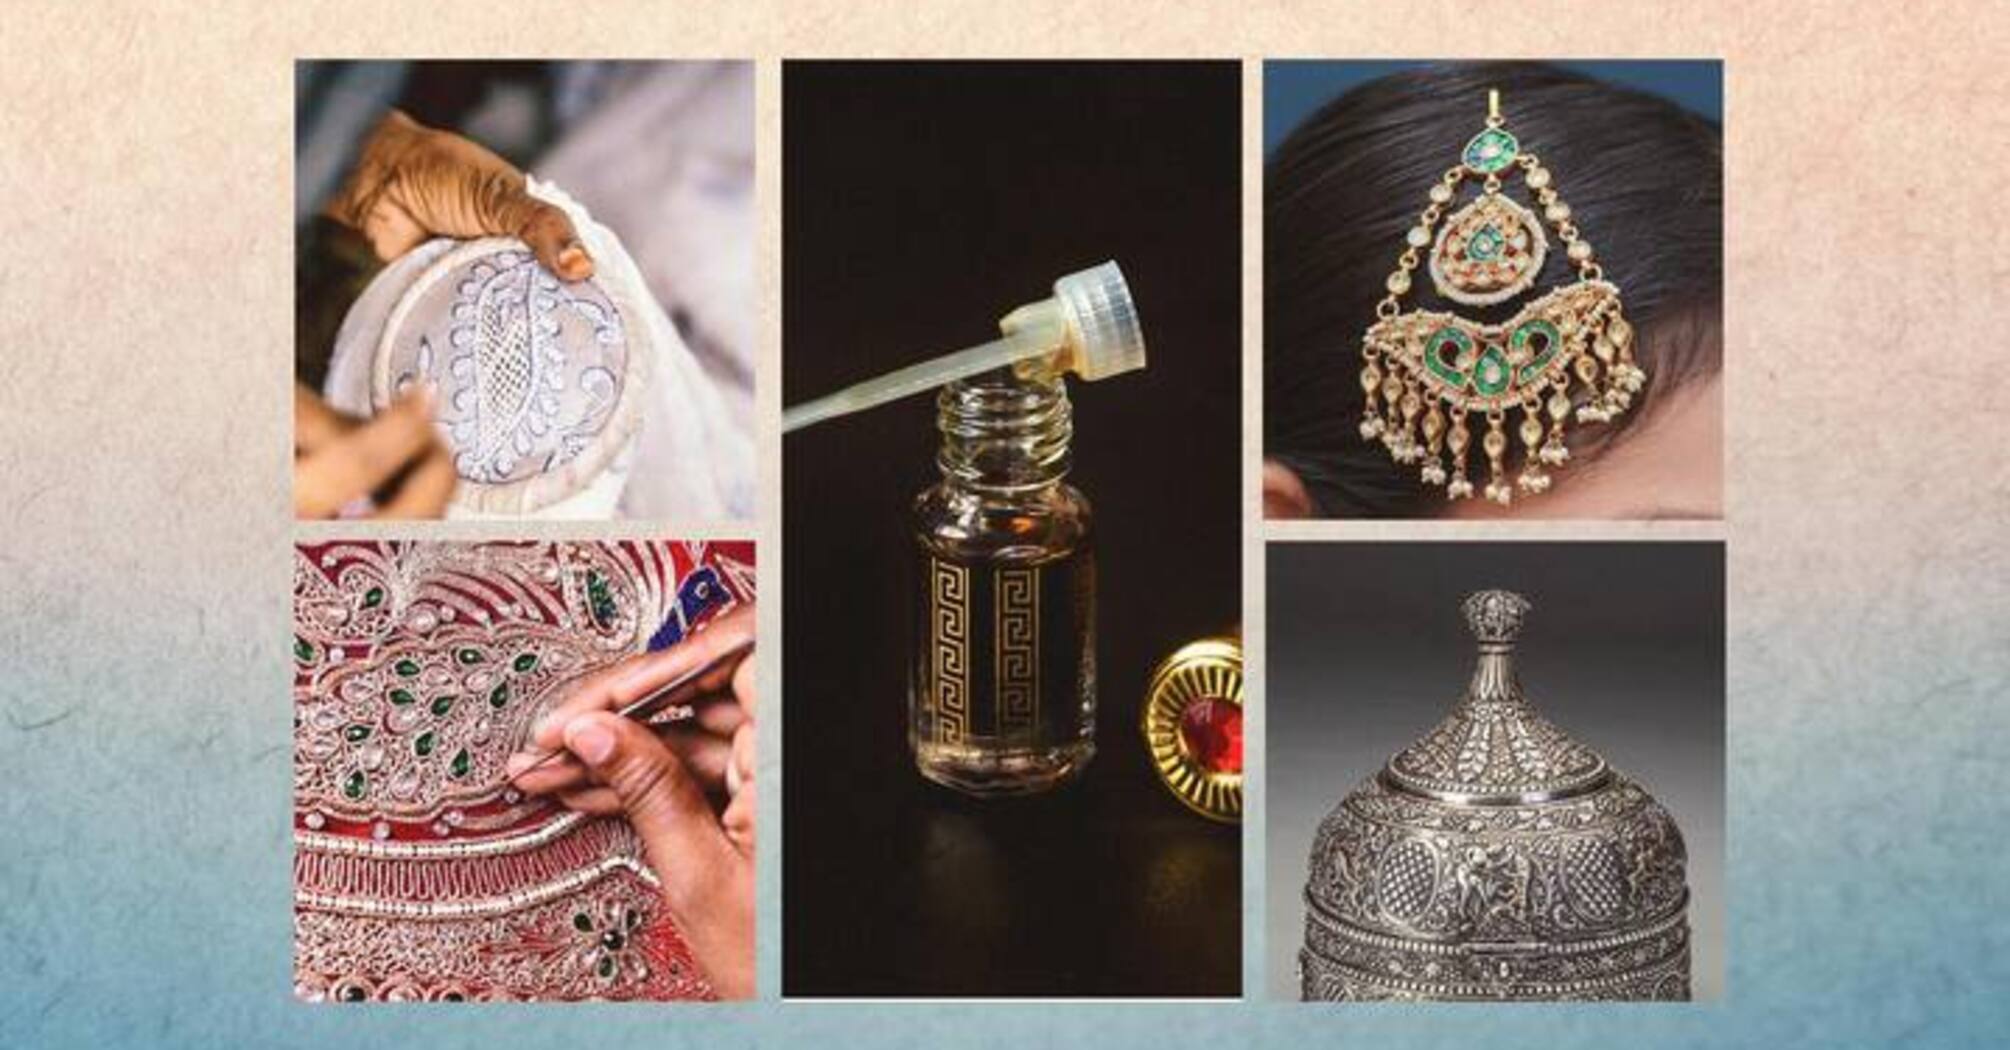 Chikankari embroidery and Zardozi crafts: what souvenirs can you bring home from a trip to Lucknow